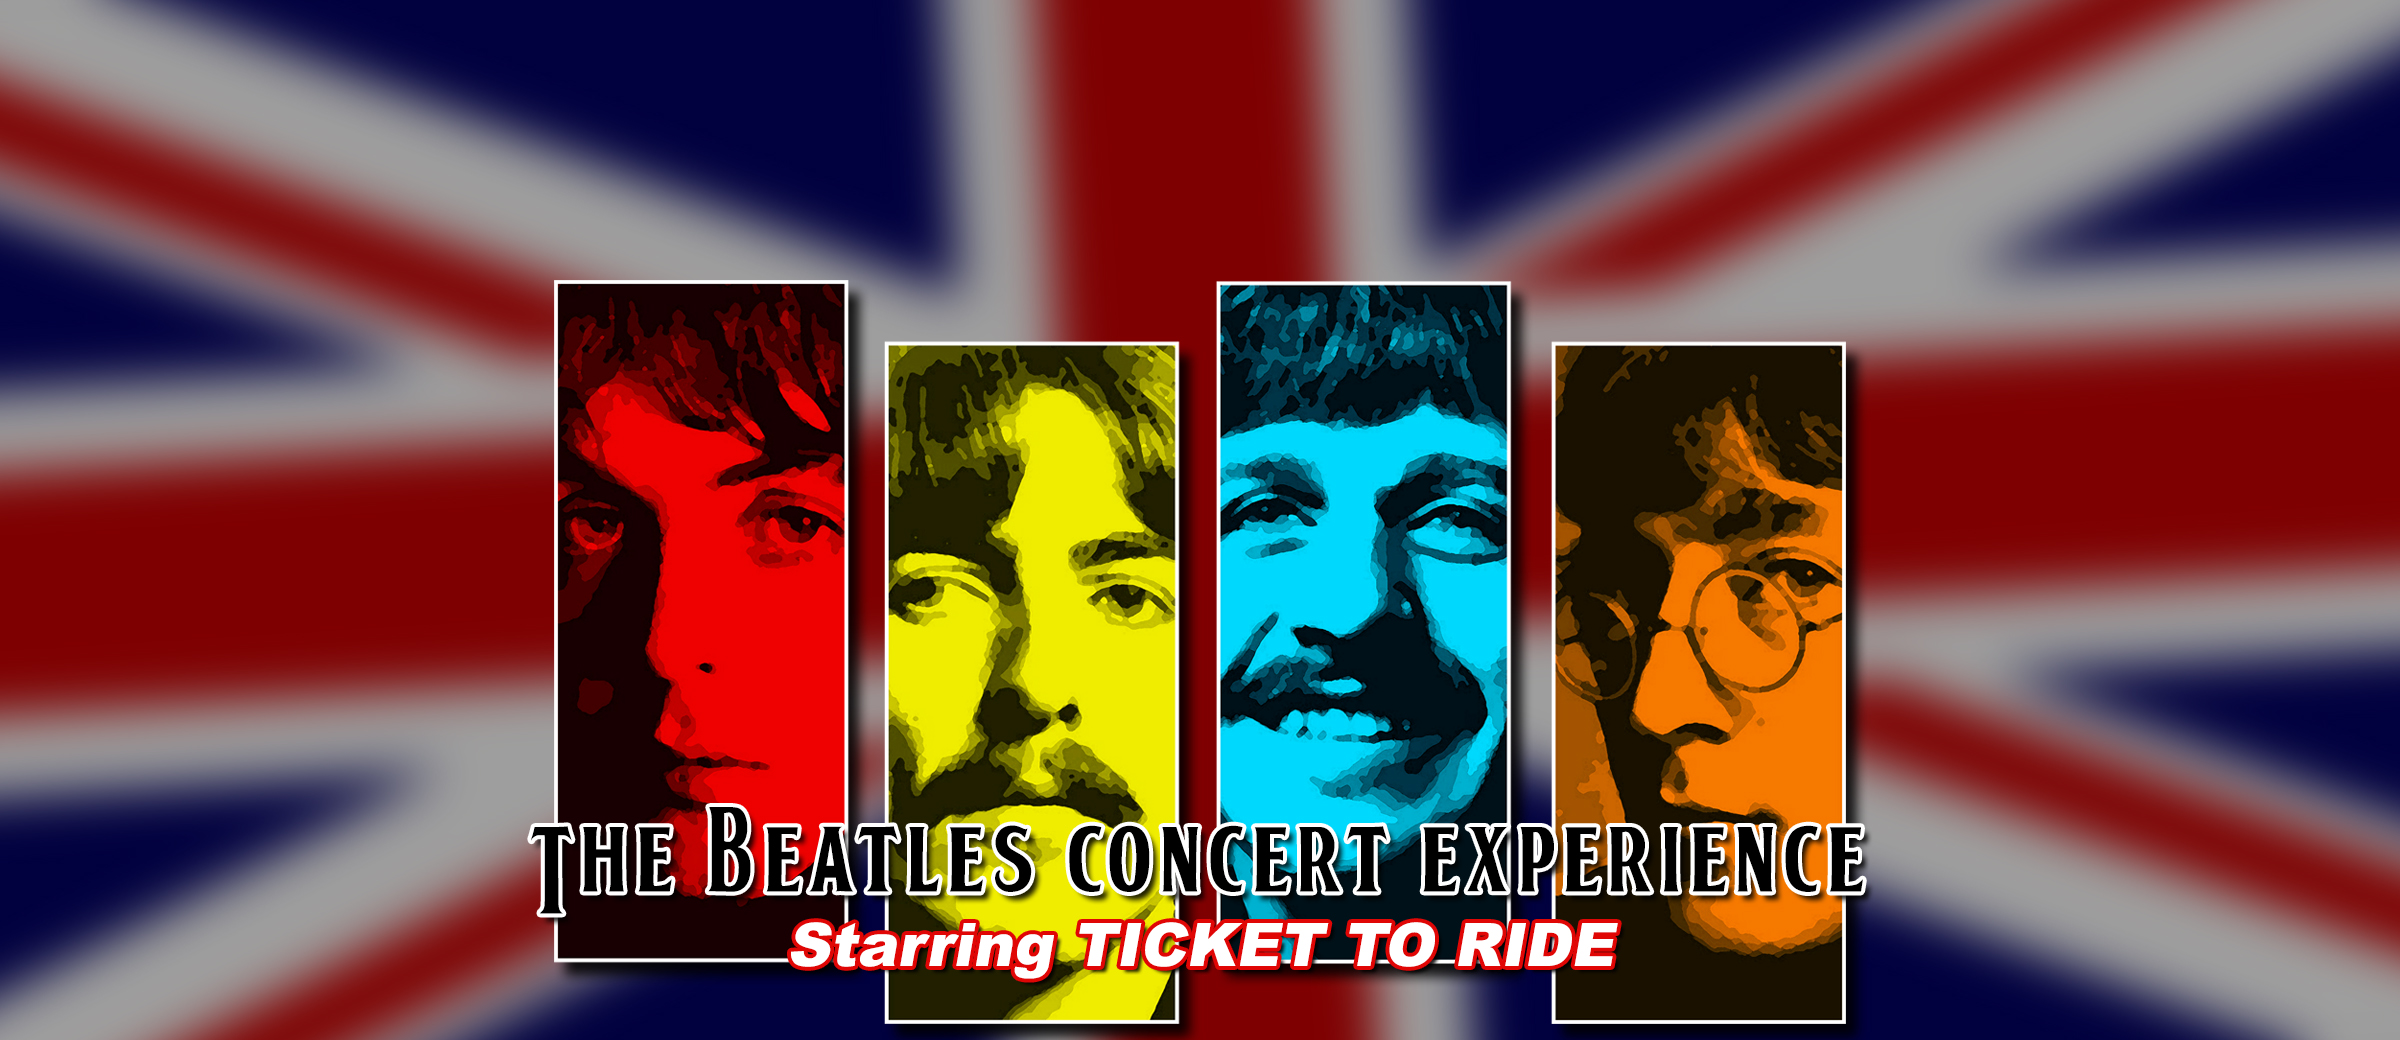 Ticket to Ride: A Live Tribute to the Beatles